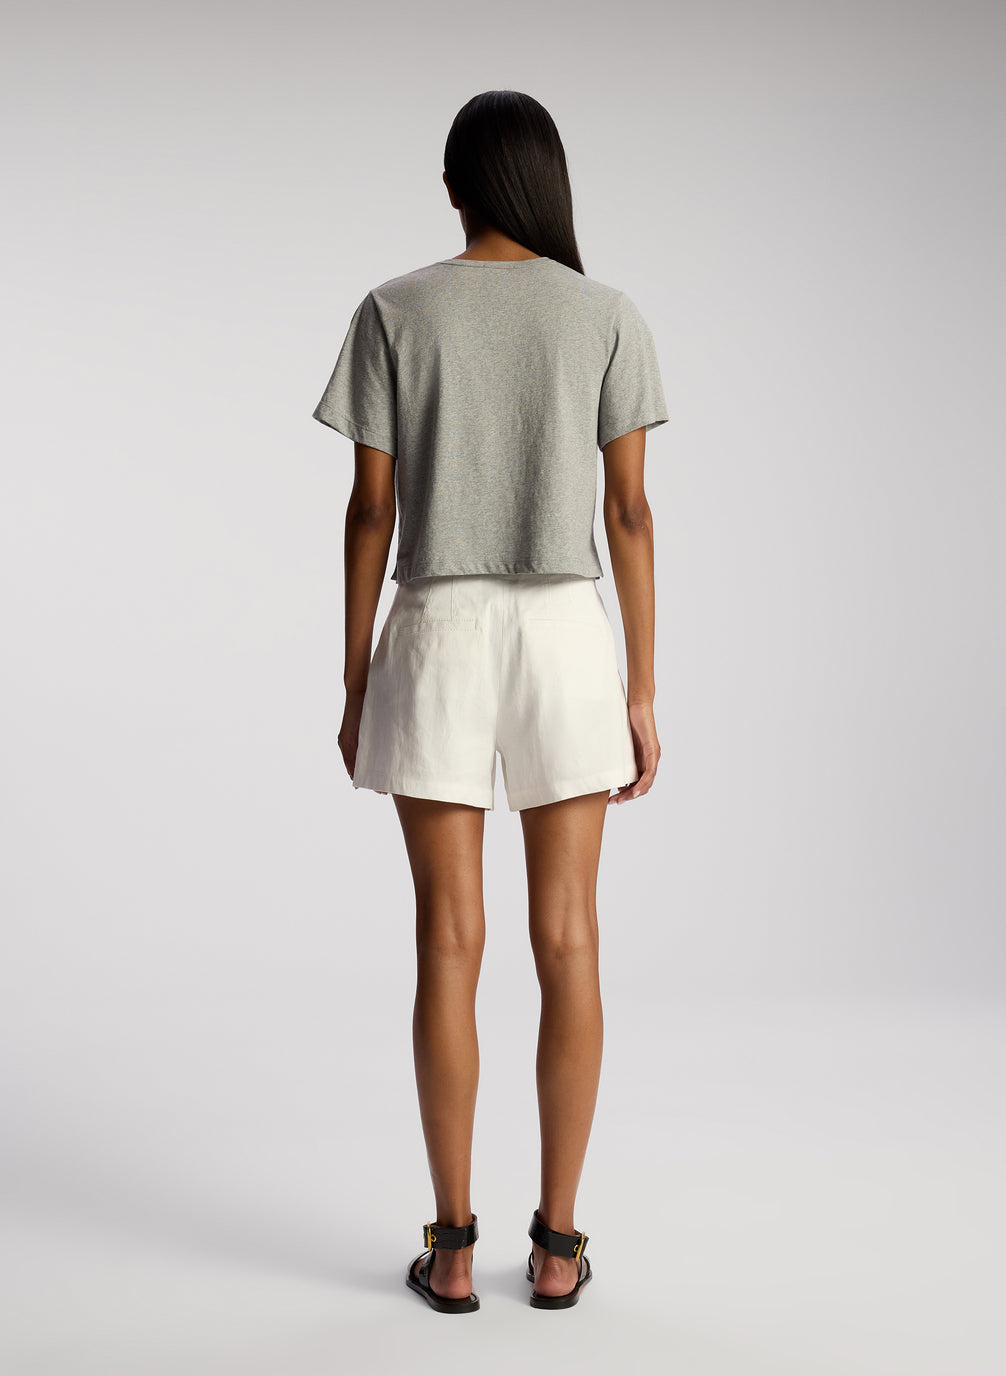 back view of woman wearing grey tshirt and white shorts